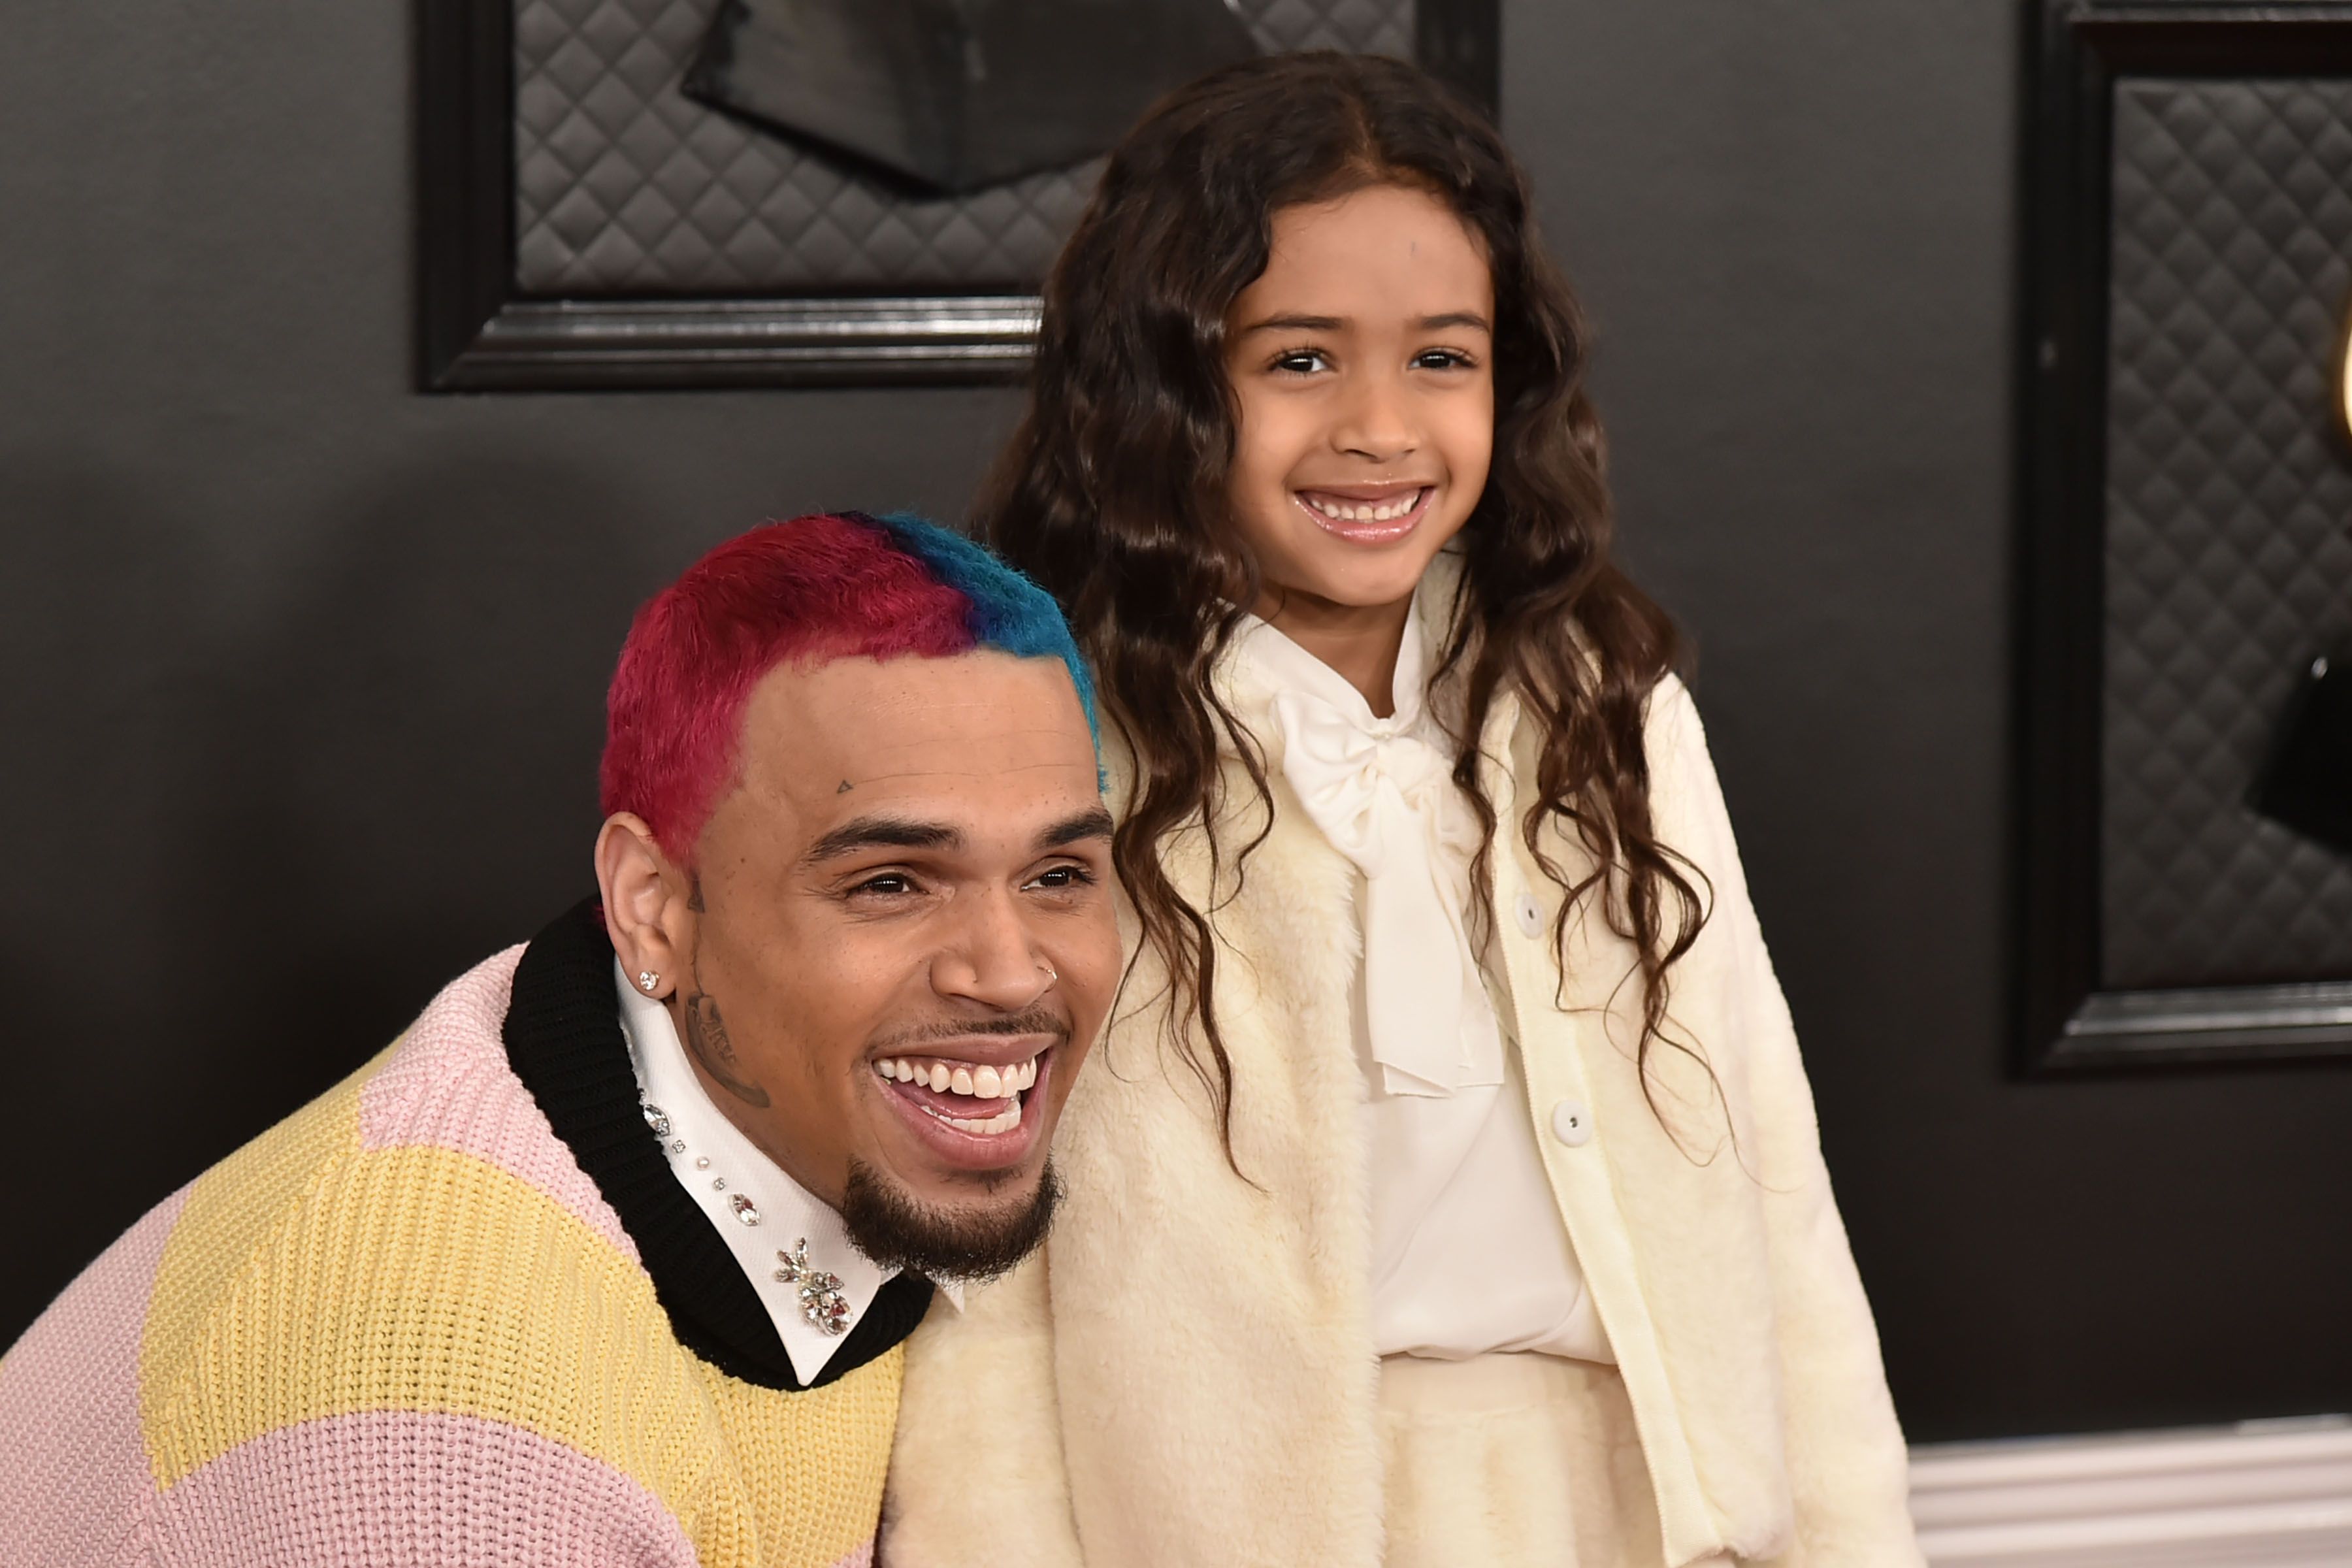 Chris Brown and Royalty Brown at the Grammy Awards on January 26, 2020 in Los Angeles. | Photo: Getty Images